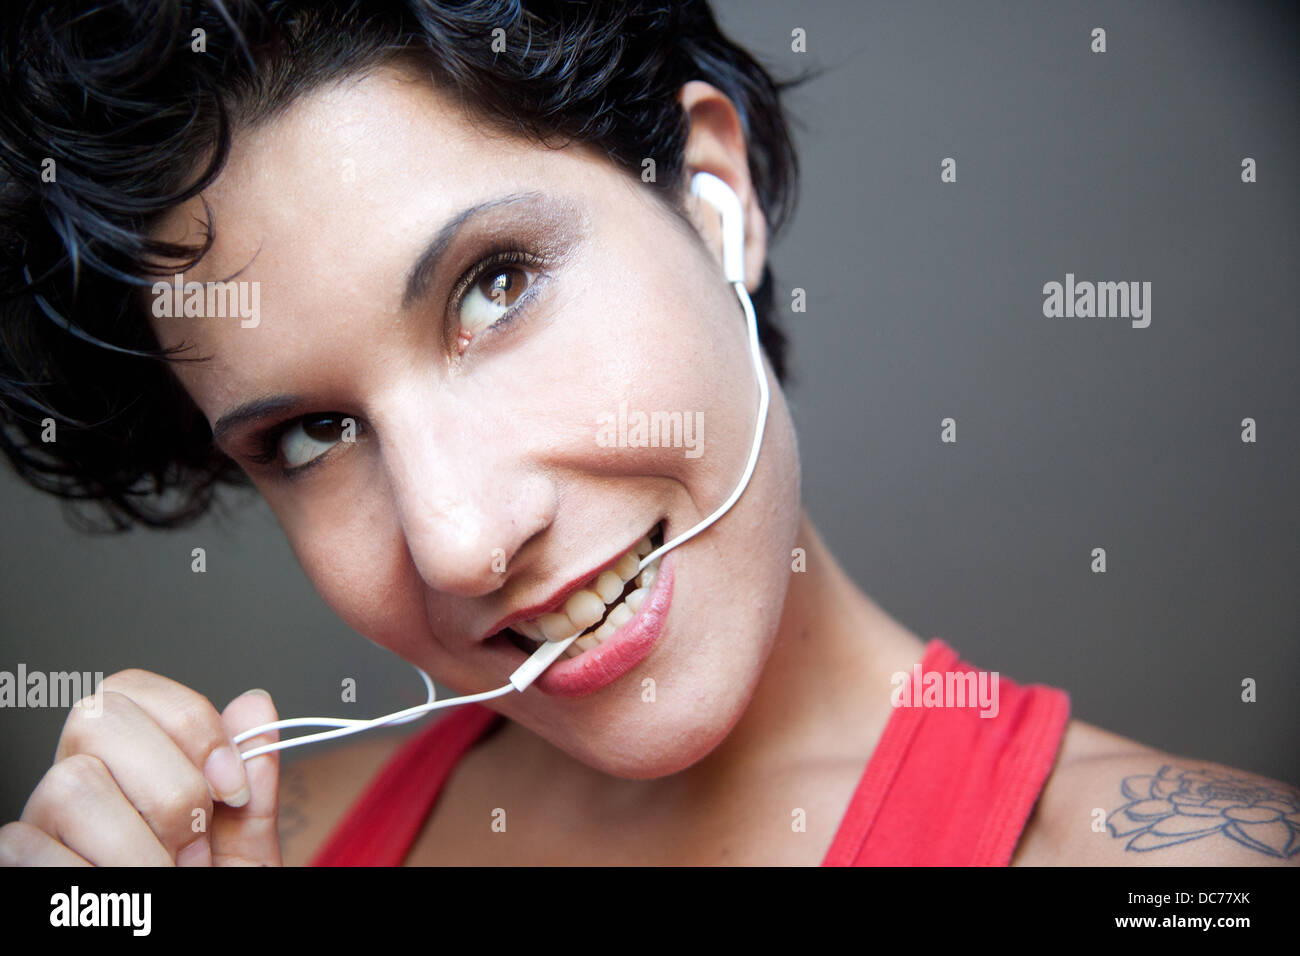 woman listening music with earphone Stock Photo